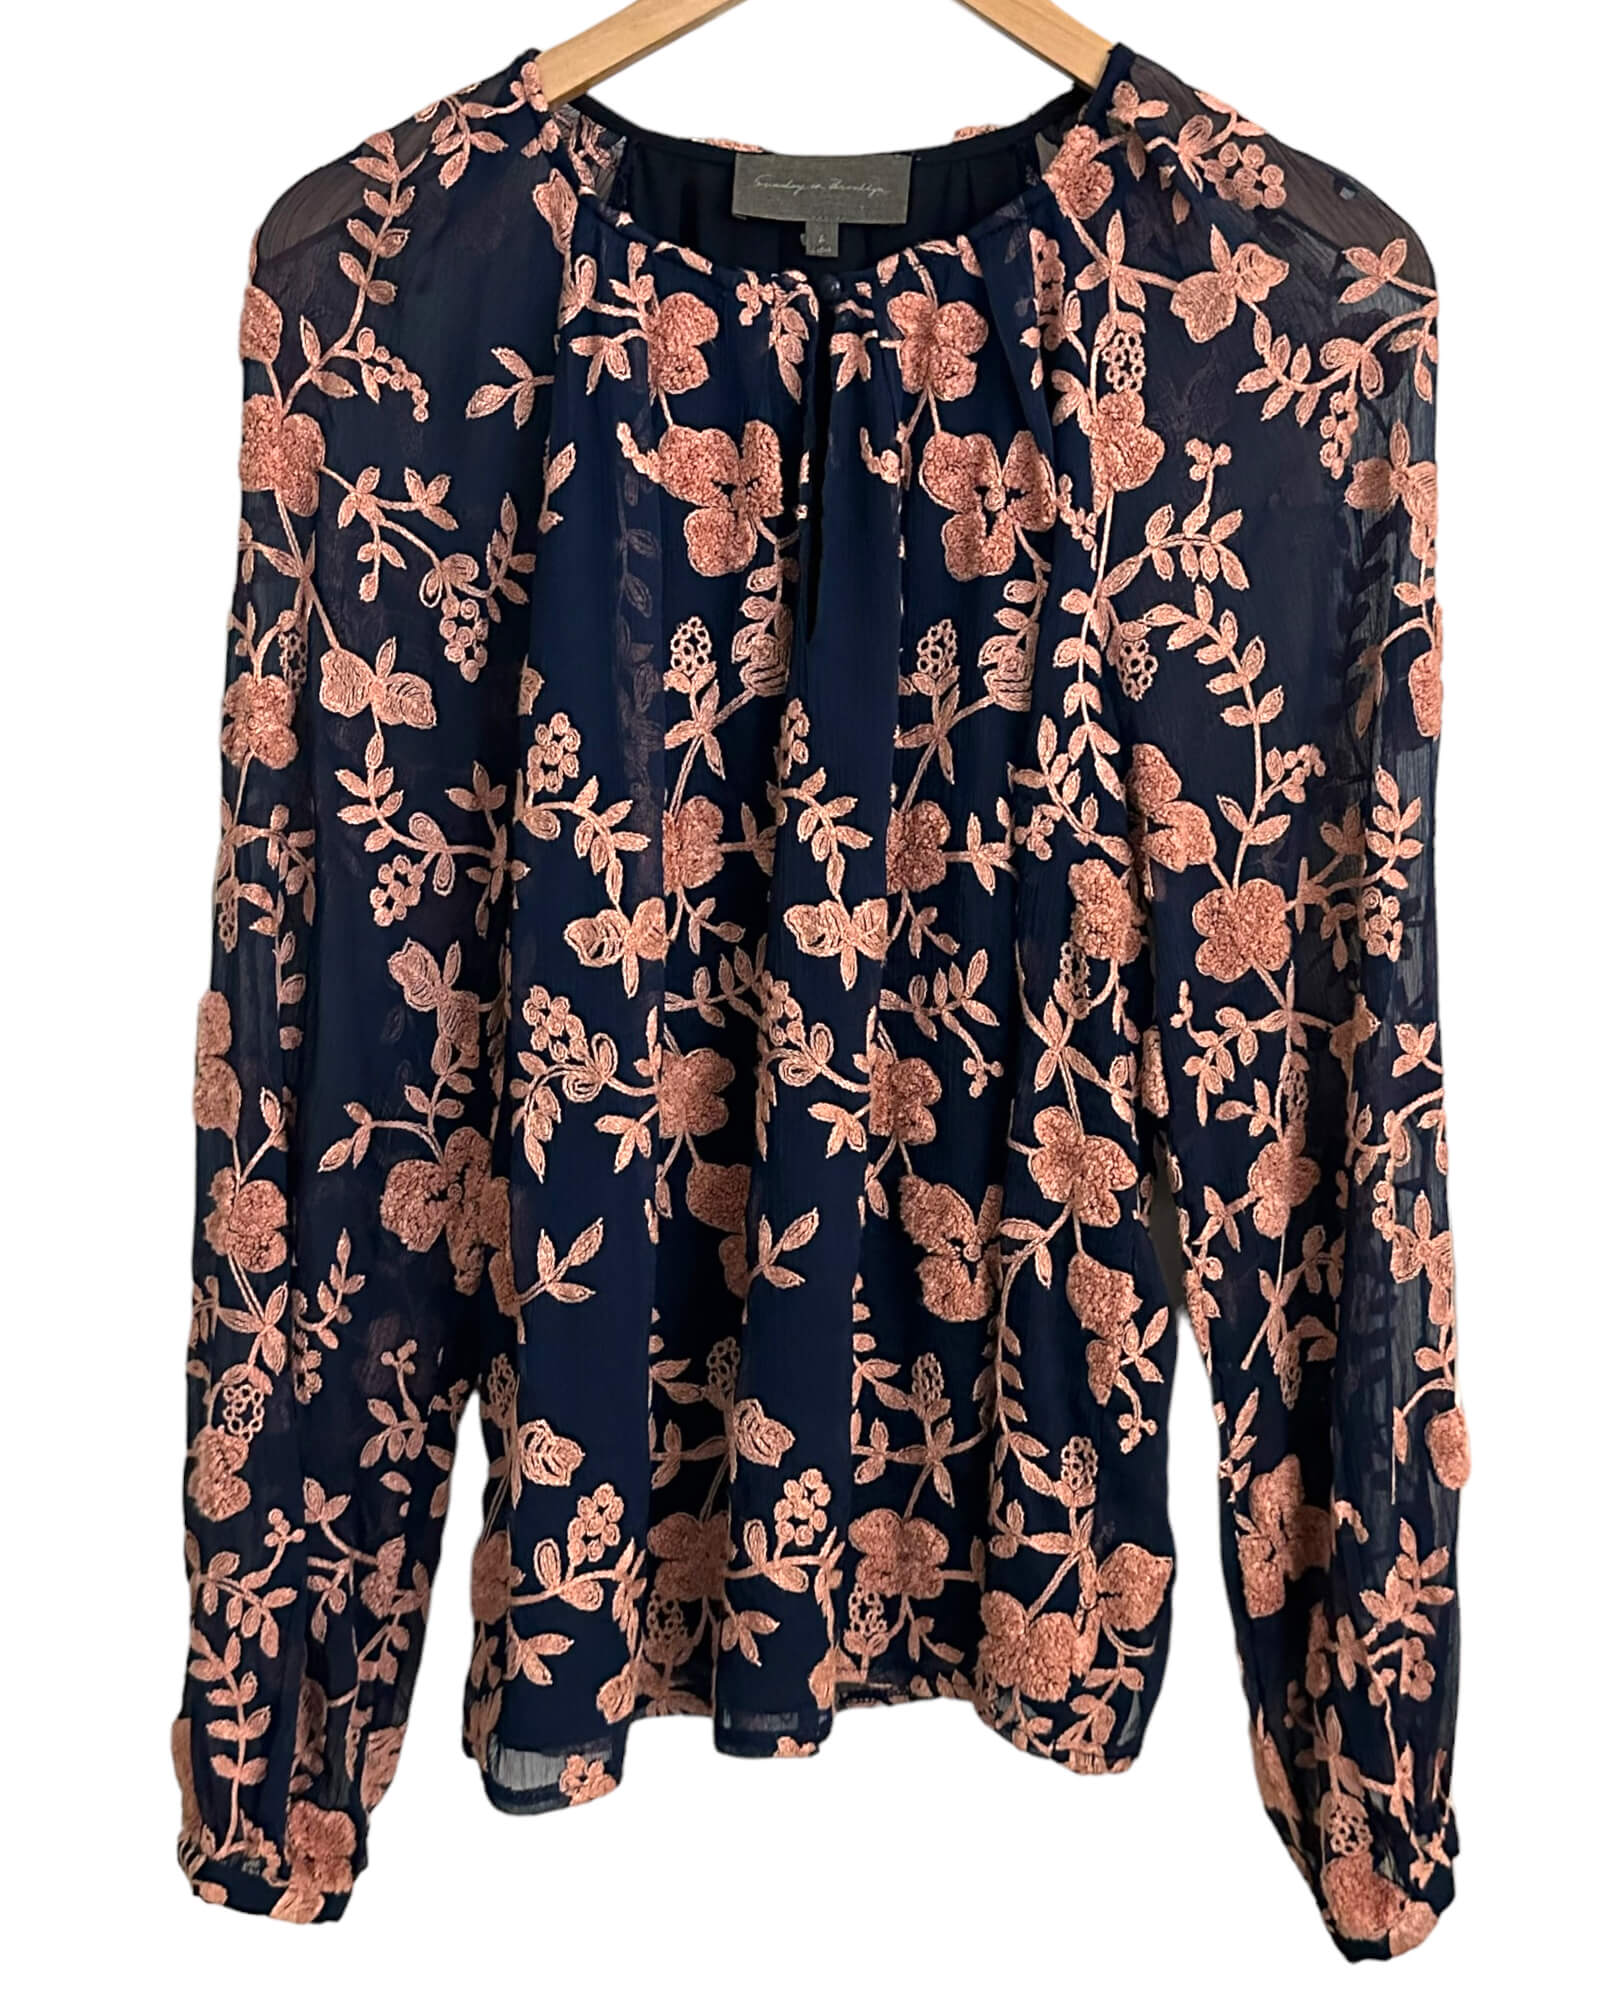 Dark Autumn SUNDAY IN BROOKLYN ANTHROPOLOGIE floral embroidery blouse 